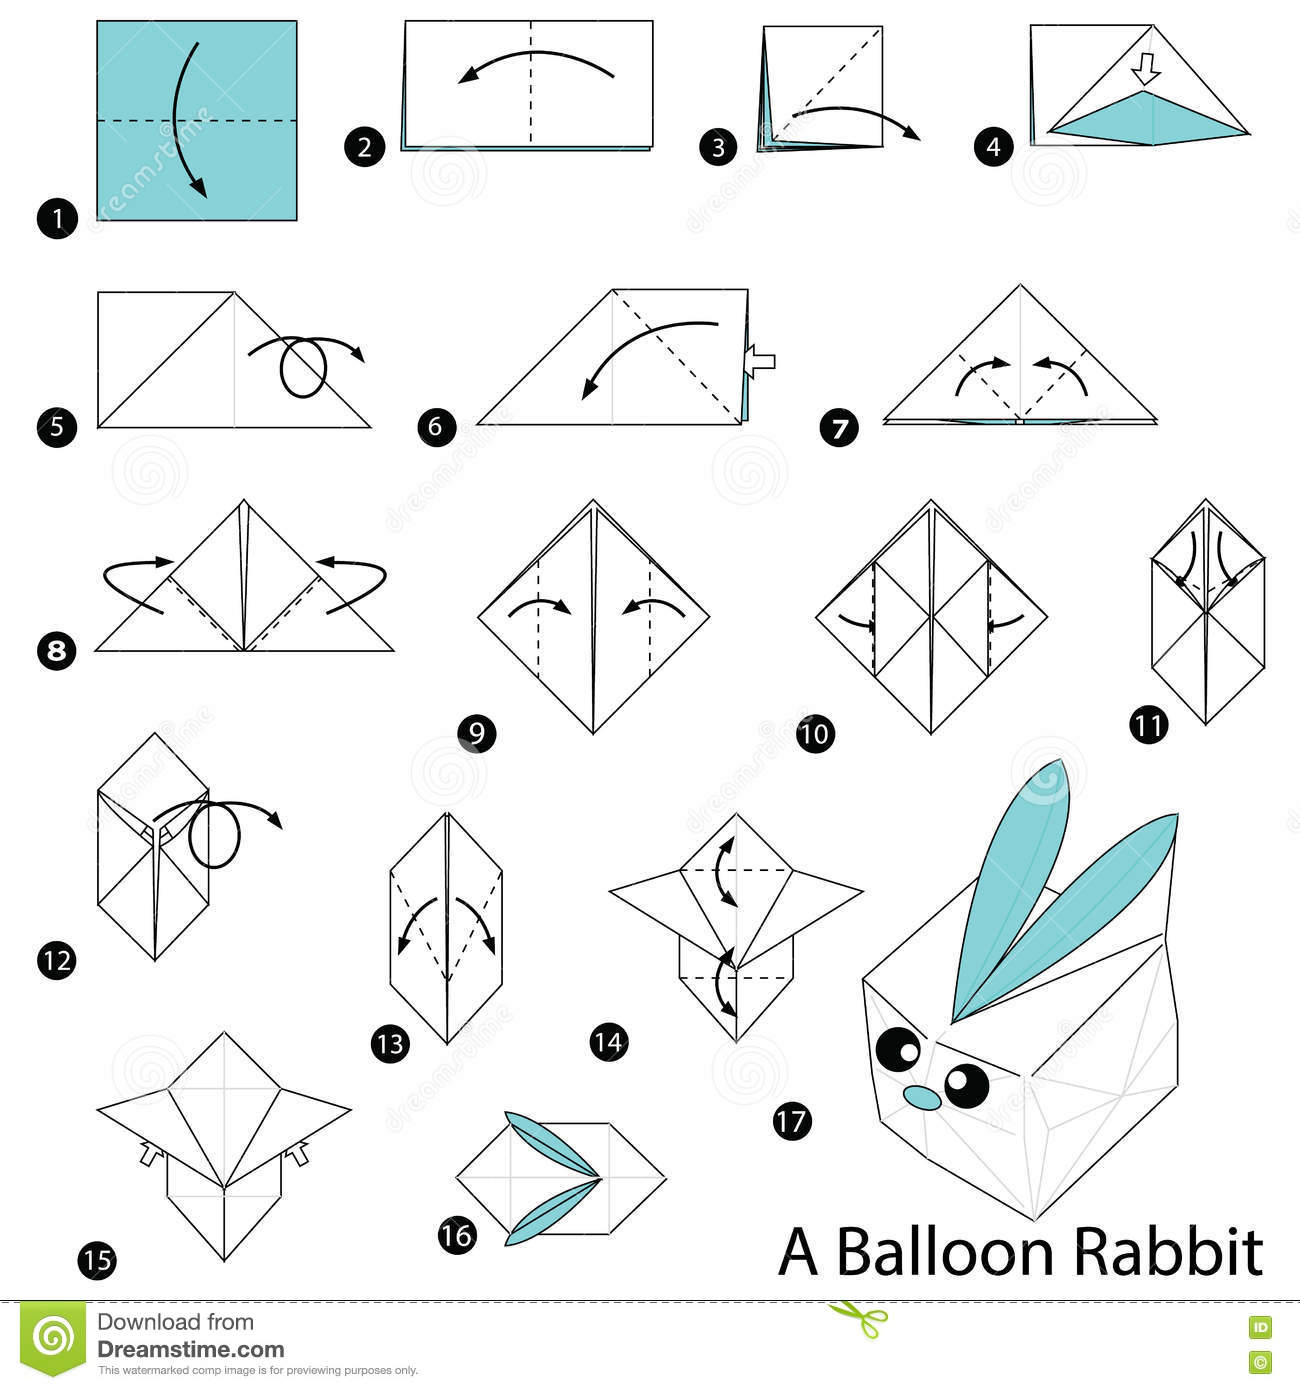 step-step-instructions-how-to-make-origami-balloon-rabbit-toy-cartoon-cute-paper.jpg